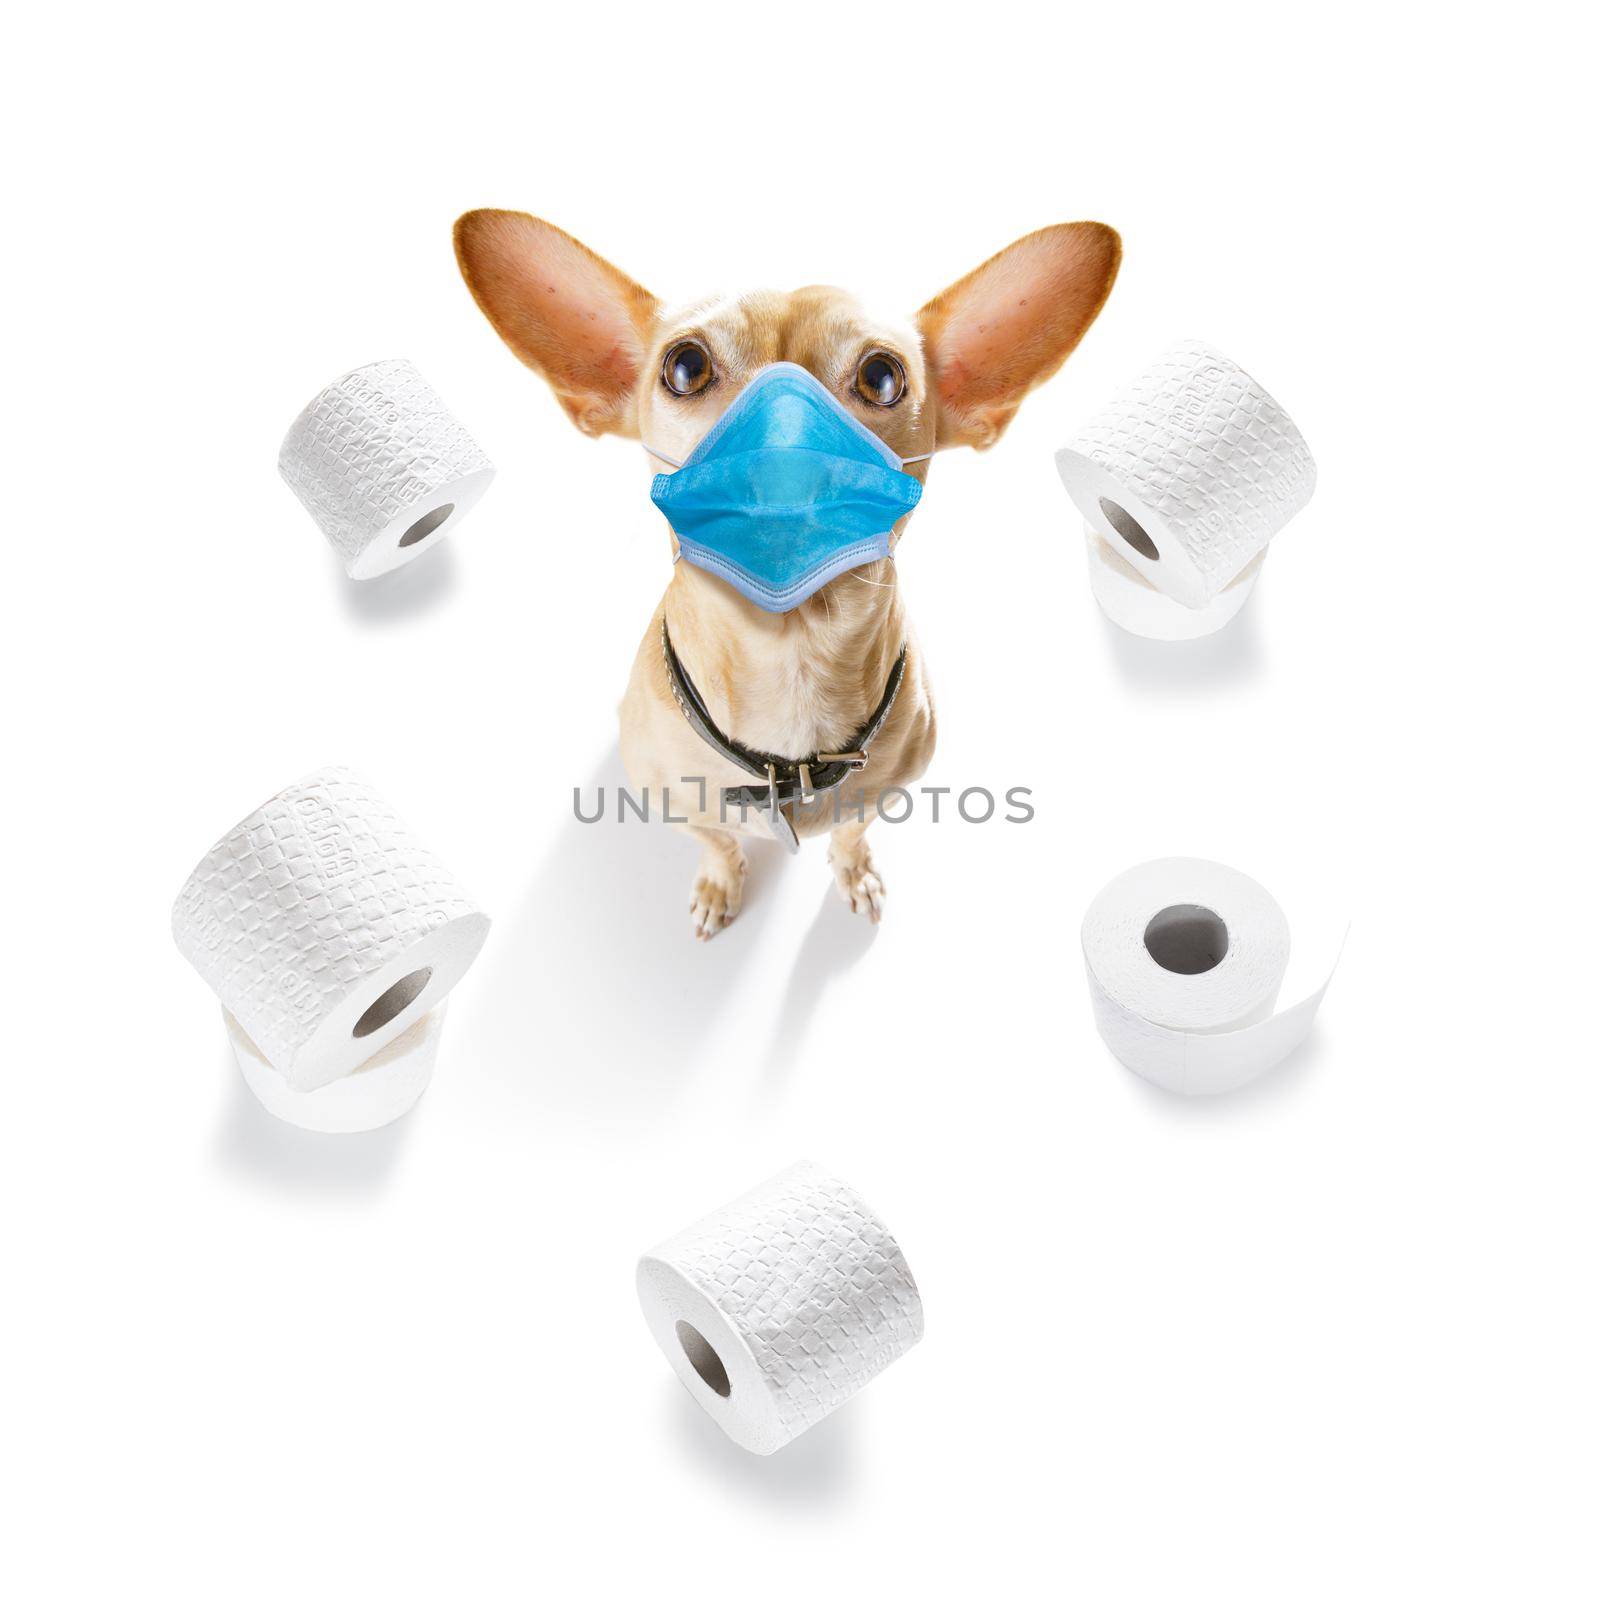 ill sick dog with illness and paper rolls by Brosch